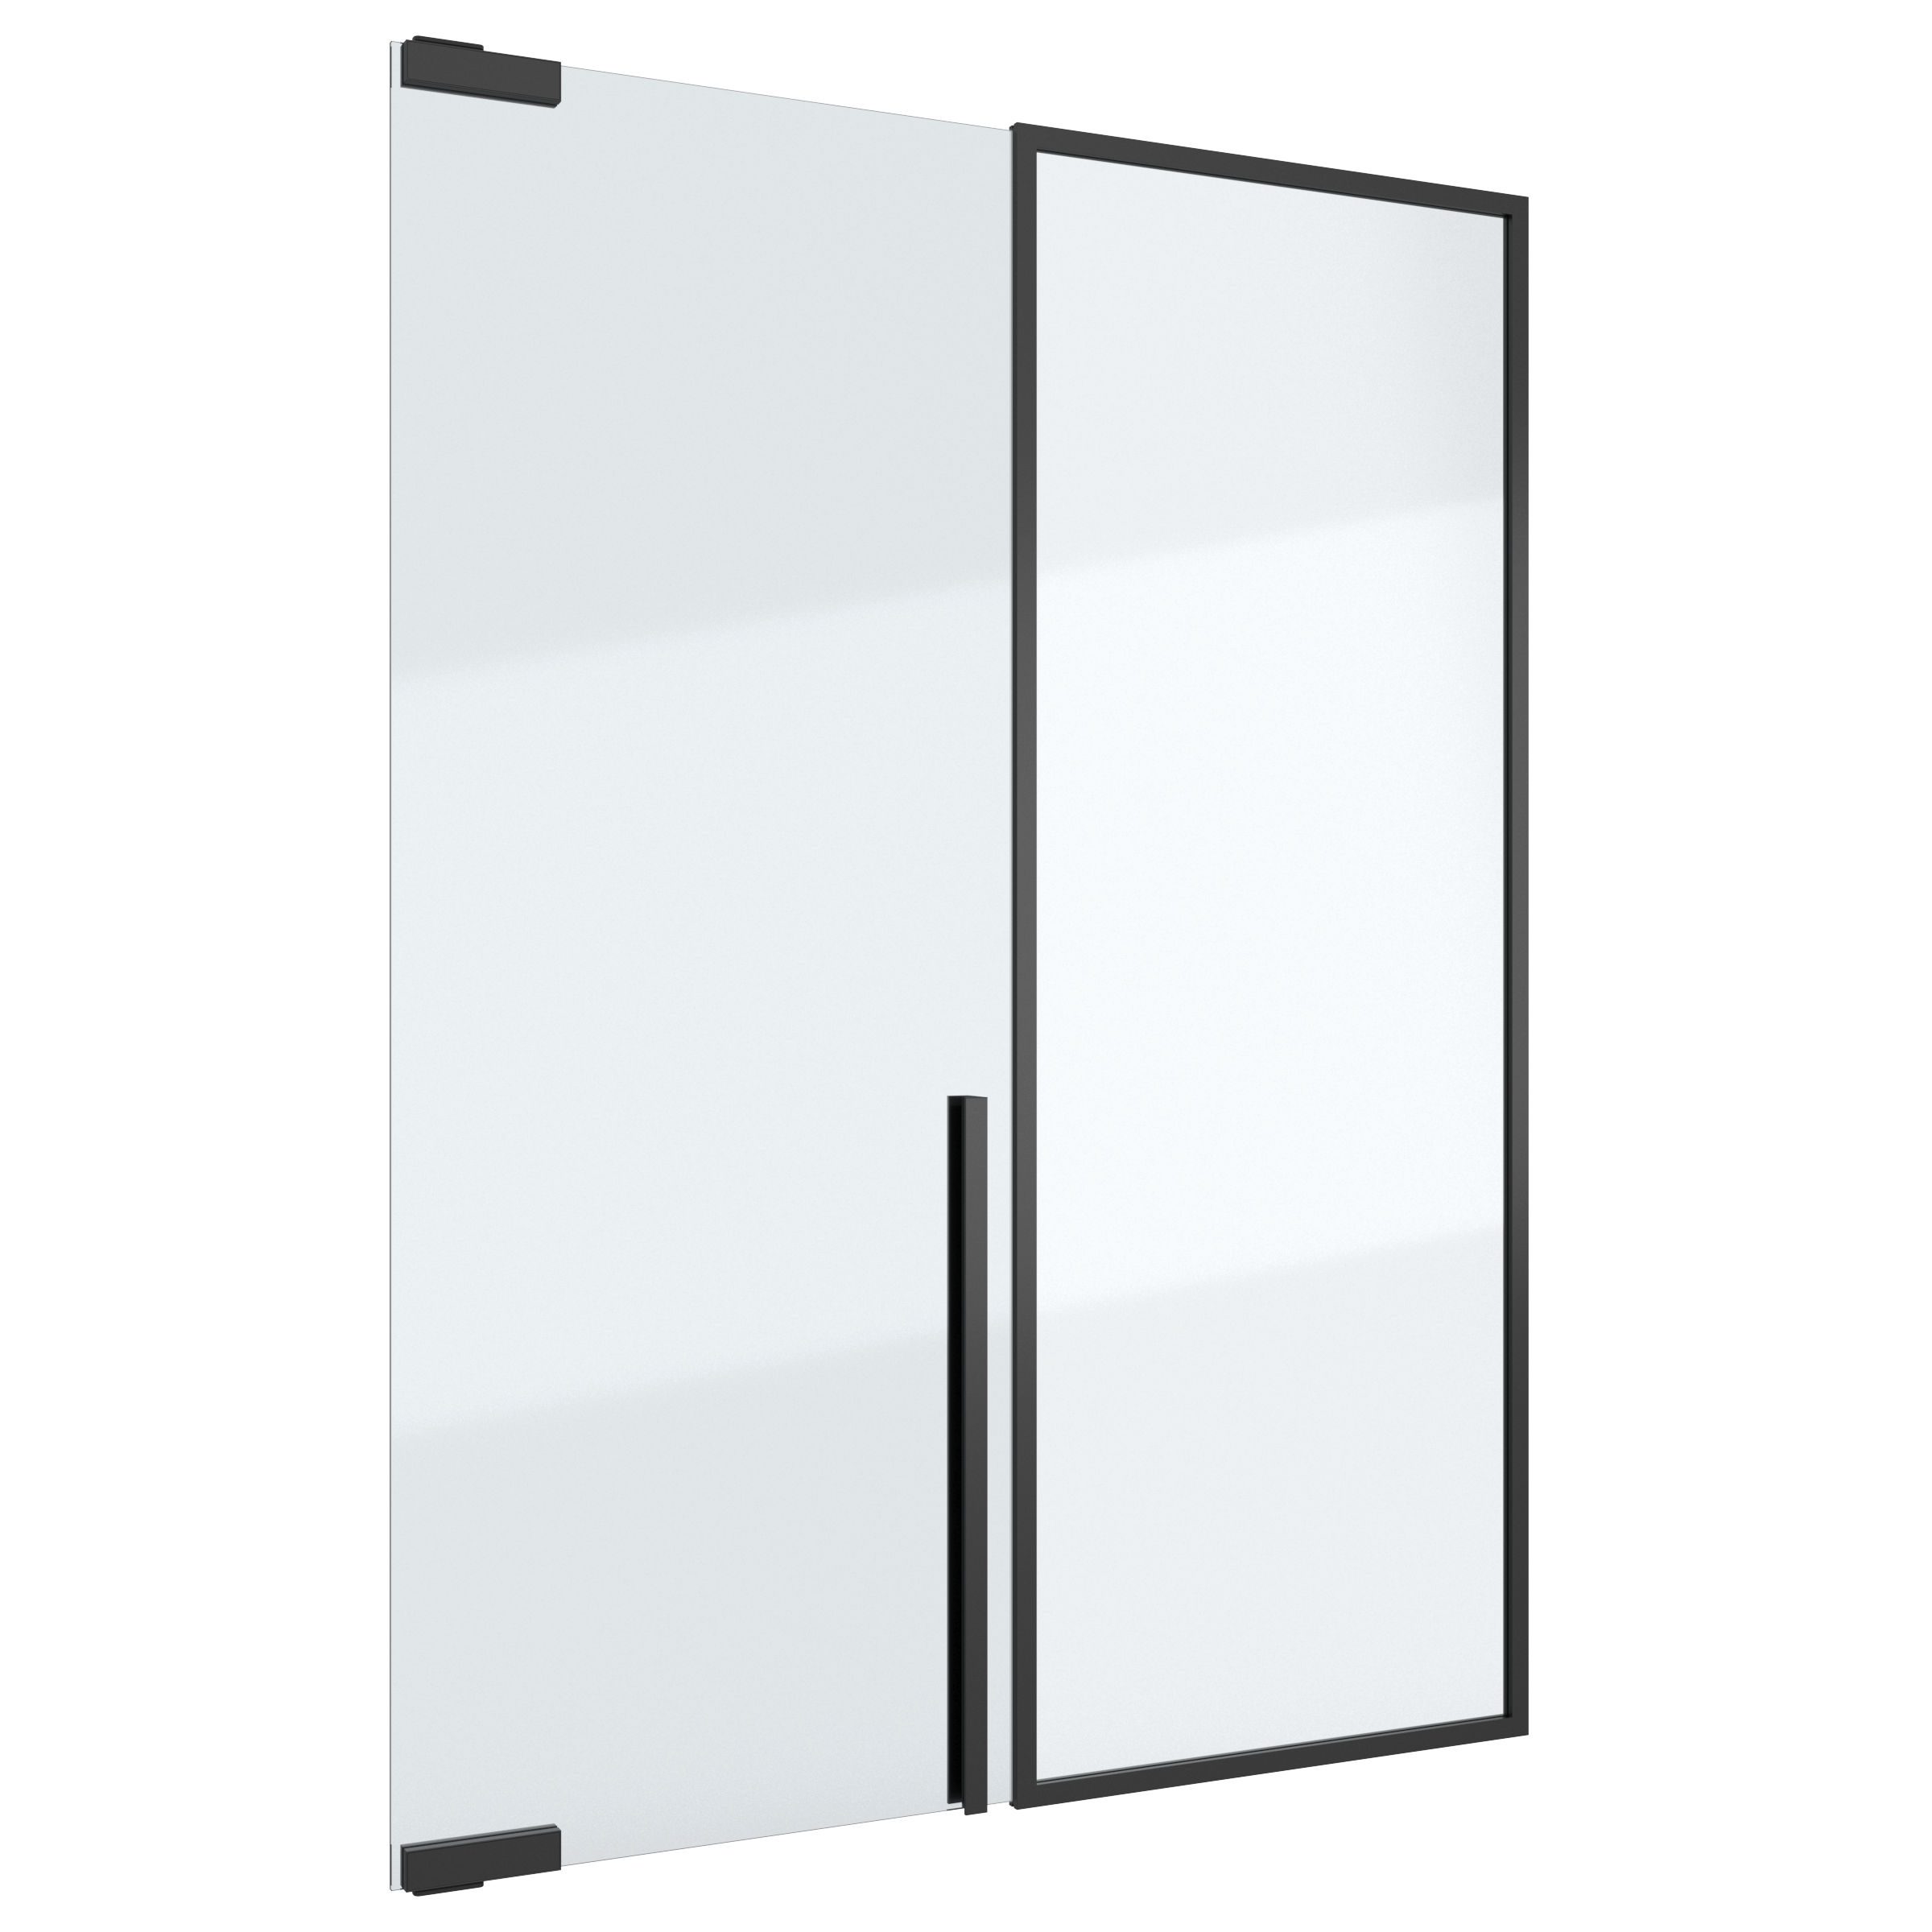 Glass pivot door with fixed partition